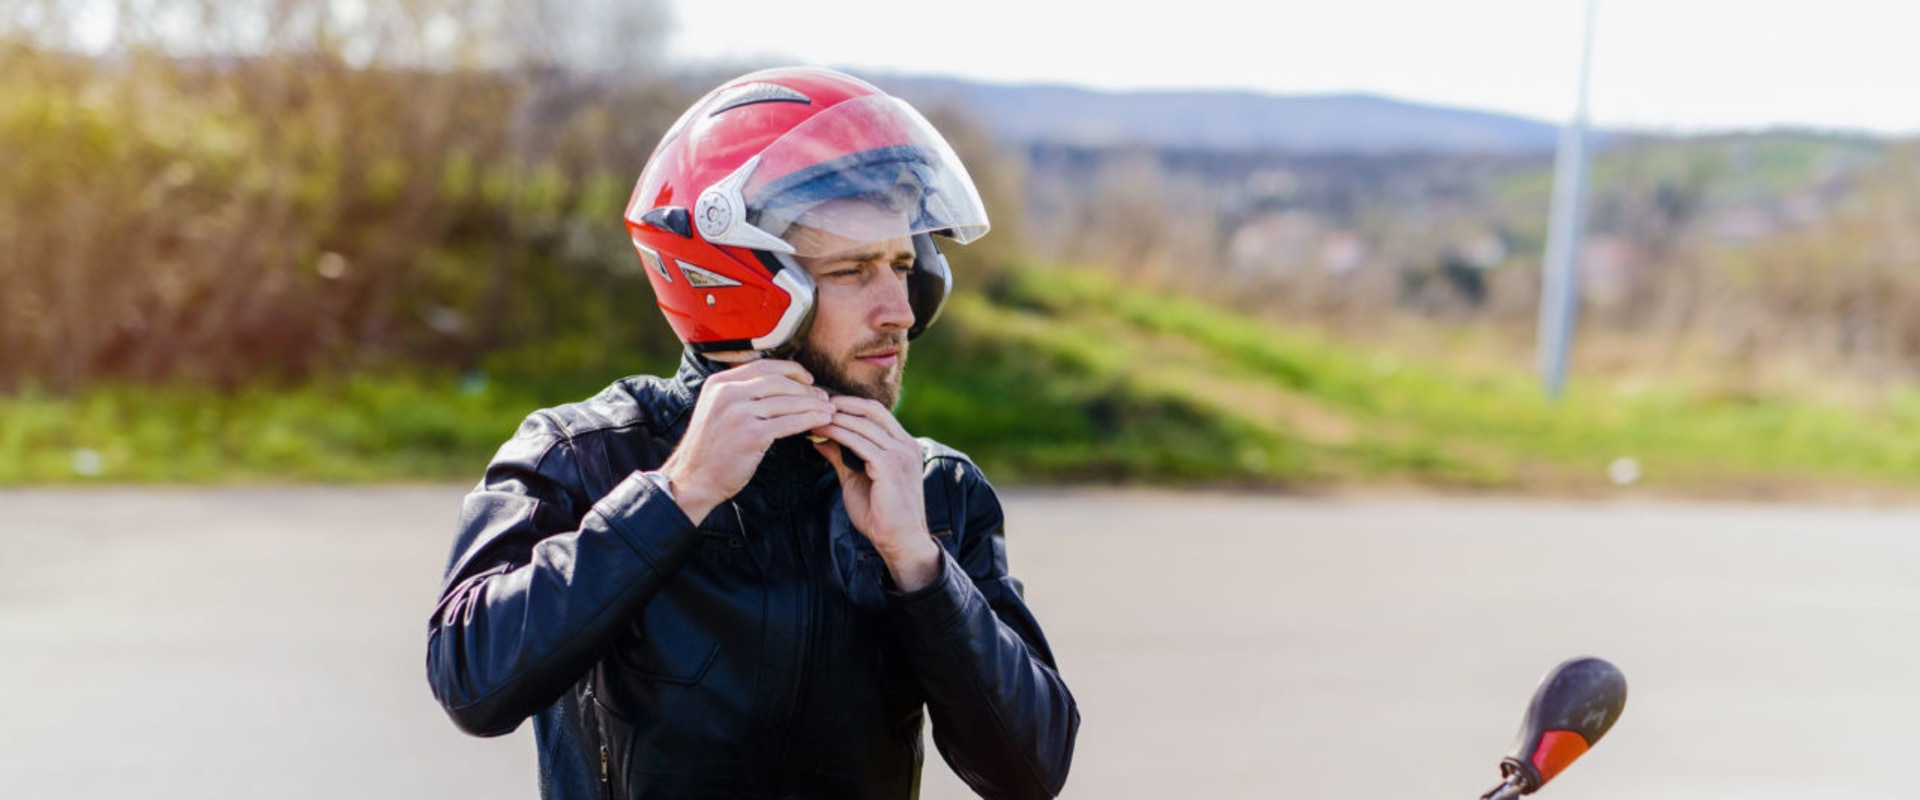 Why You Need to Wear Motorcycle Protective Gear